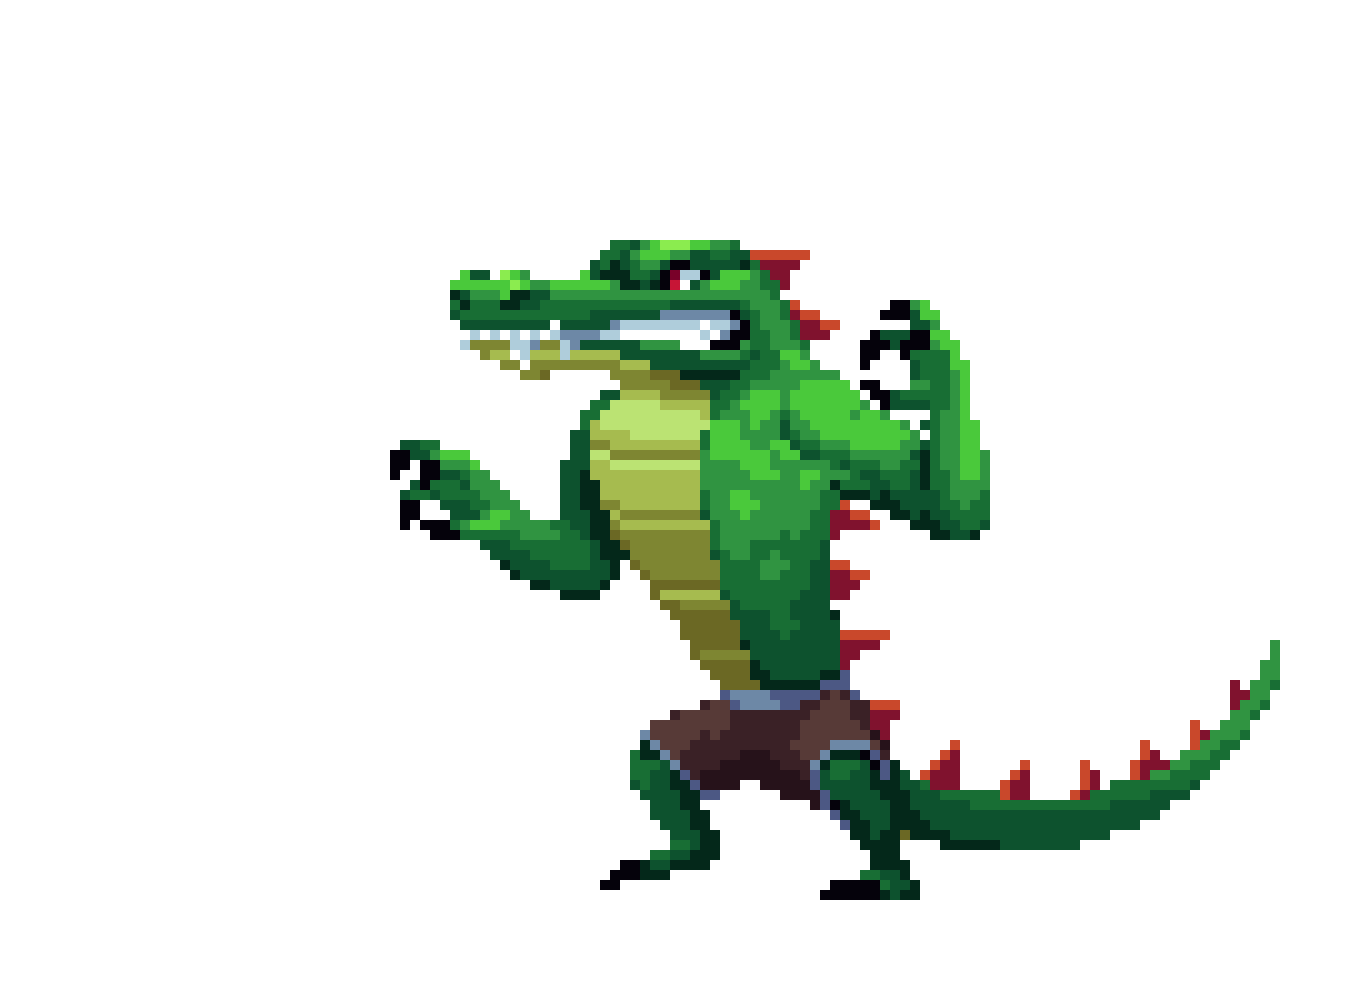 Animated alligator snapping jaws in pixel art style.